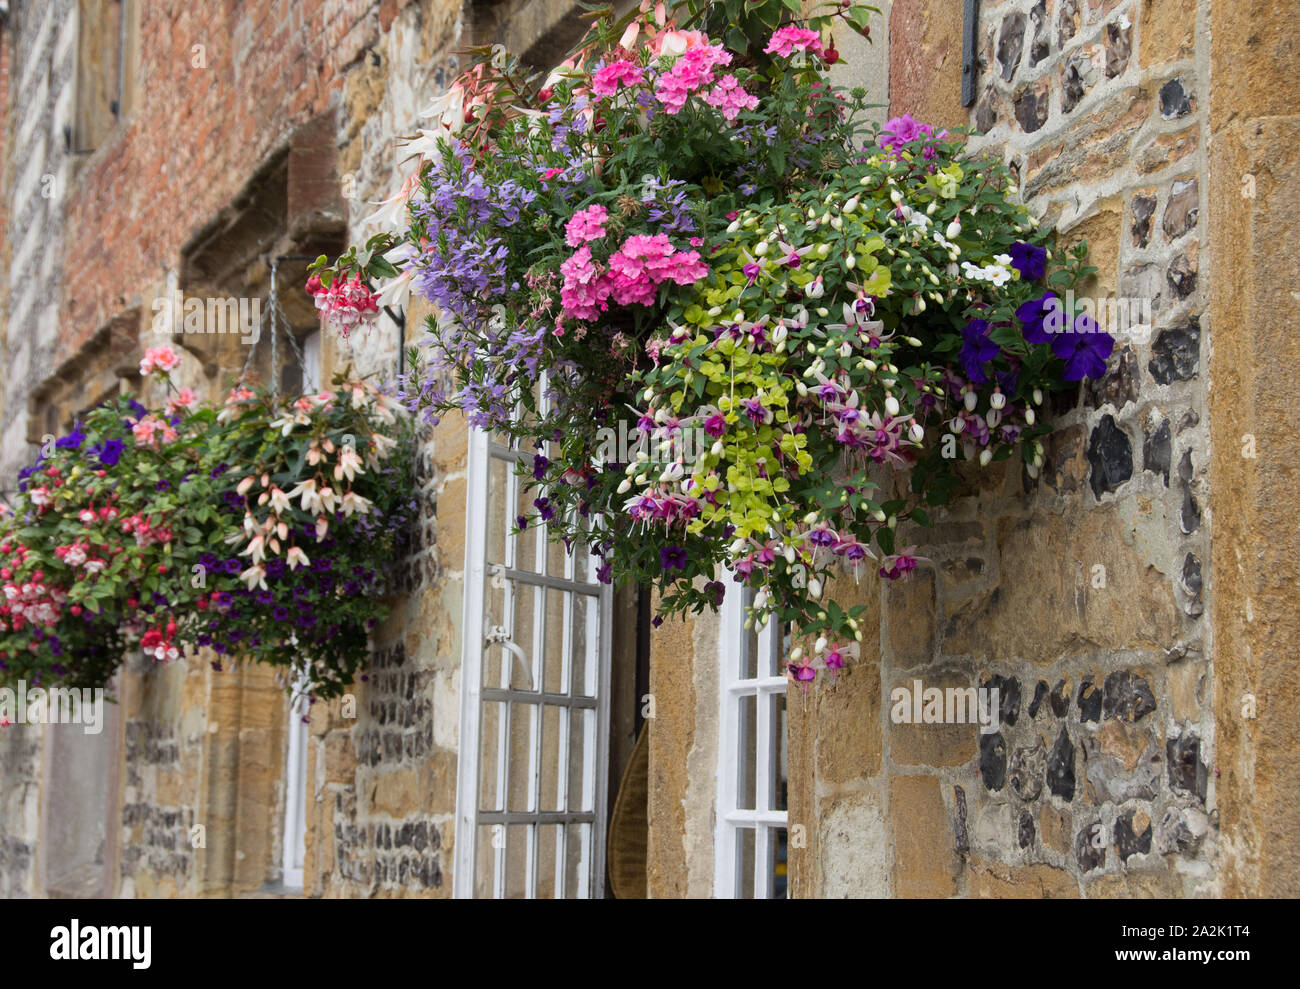 Pretty hanging baskets on cottage walls in Dorset Stock Photo - Alamy